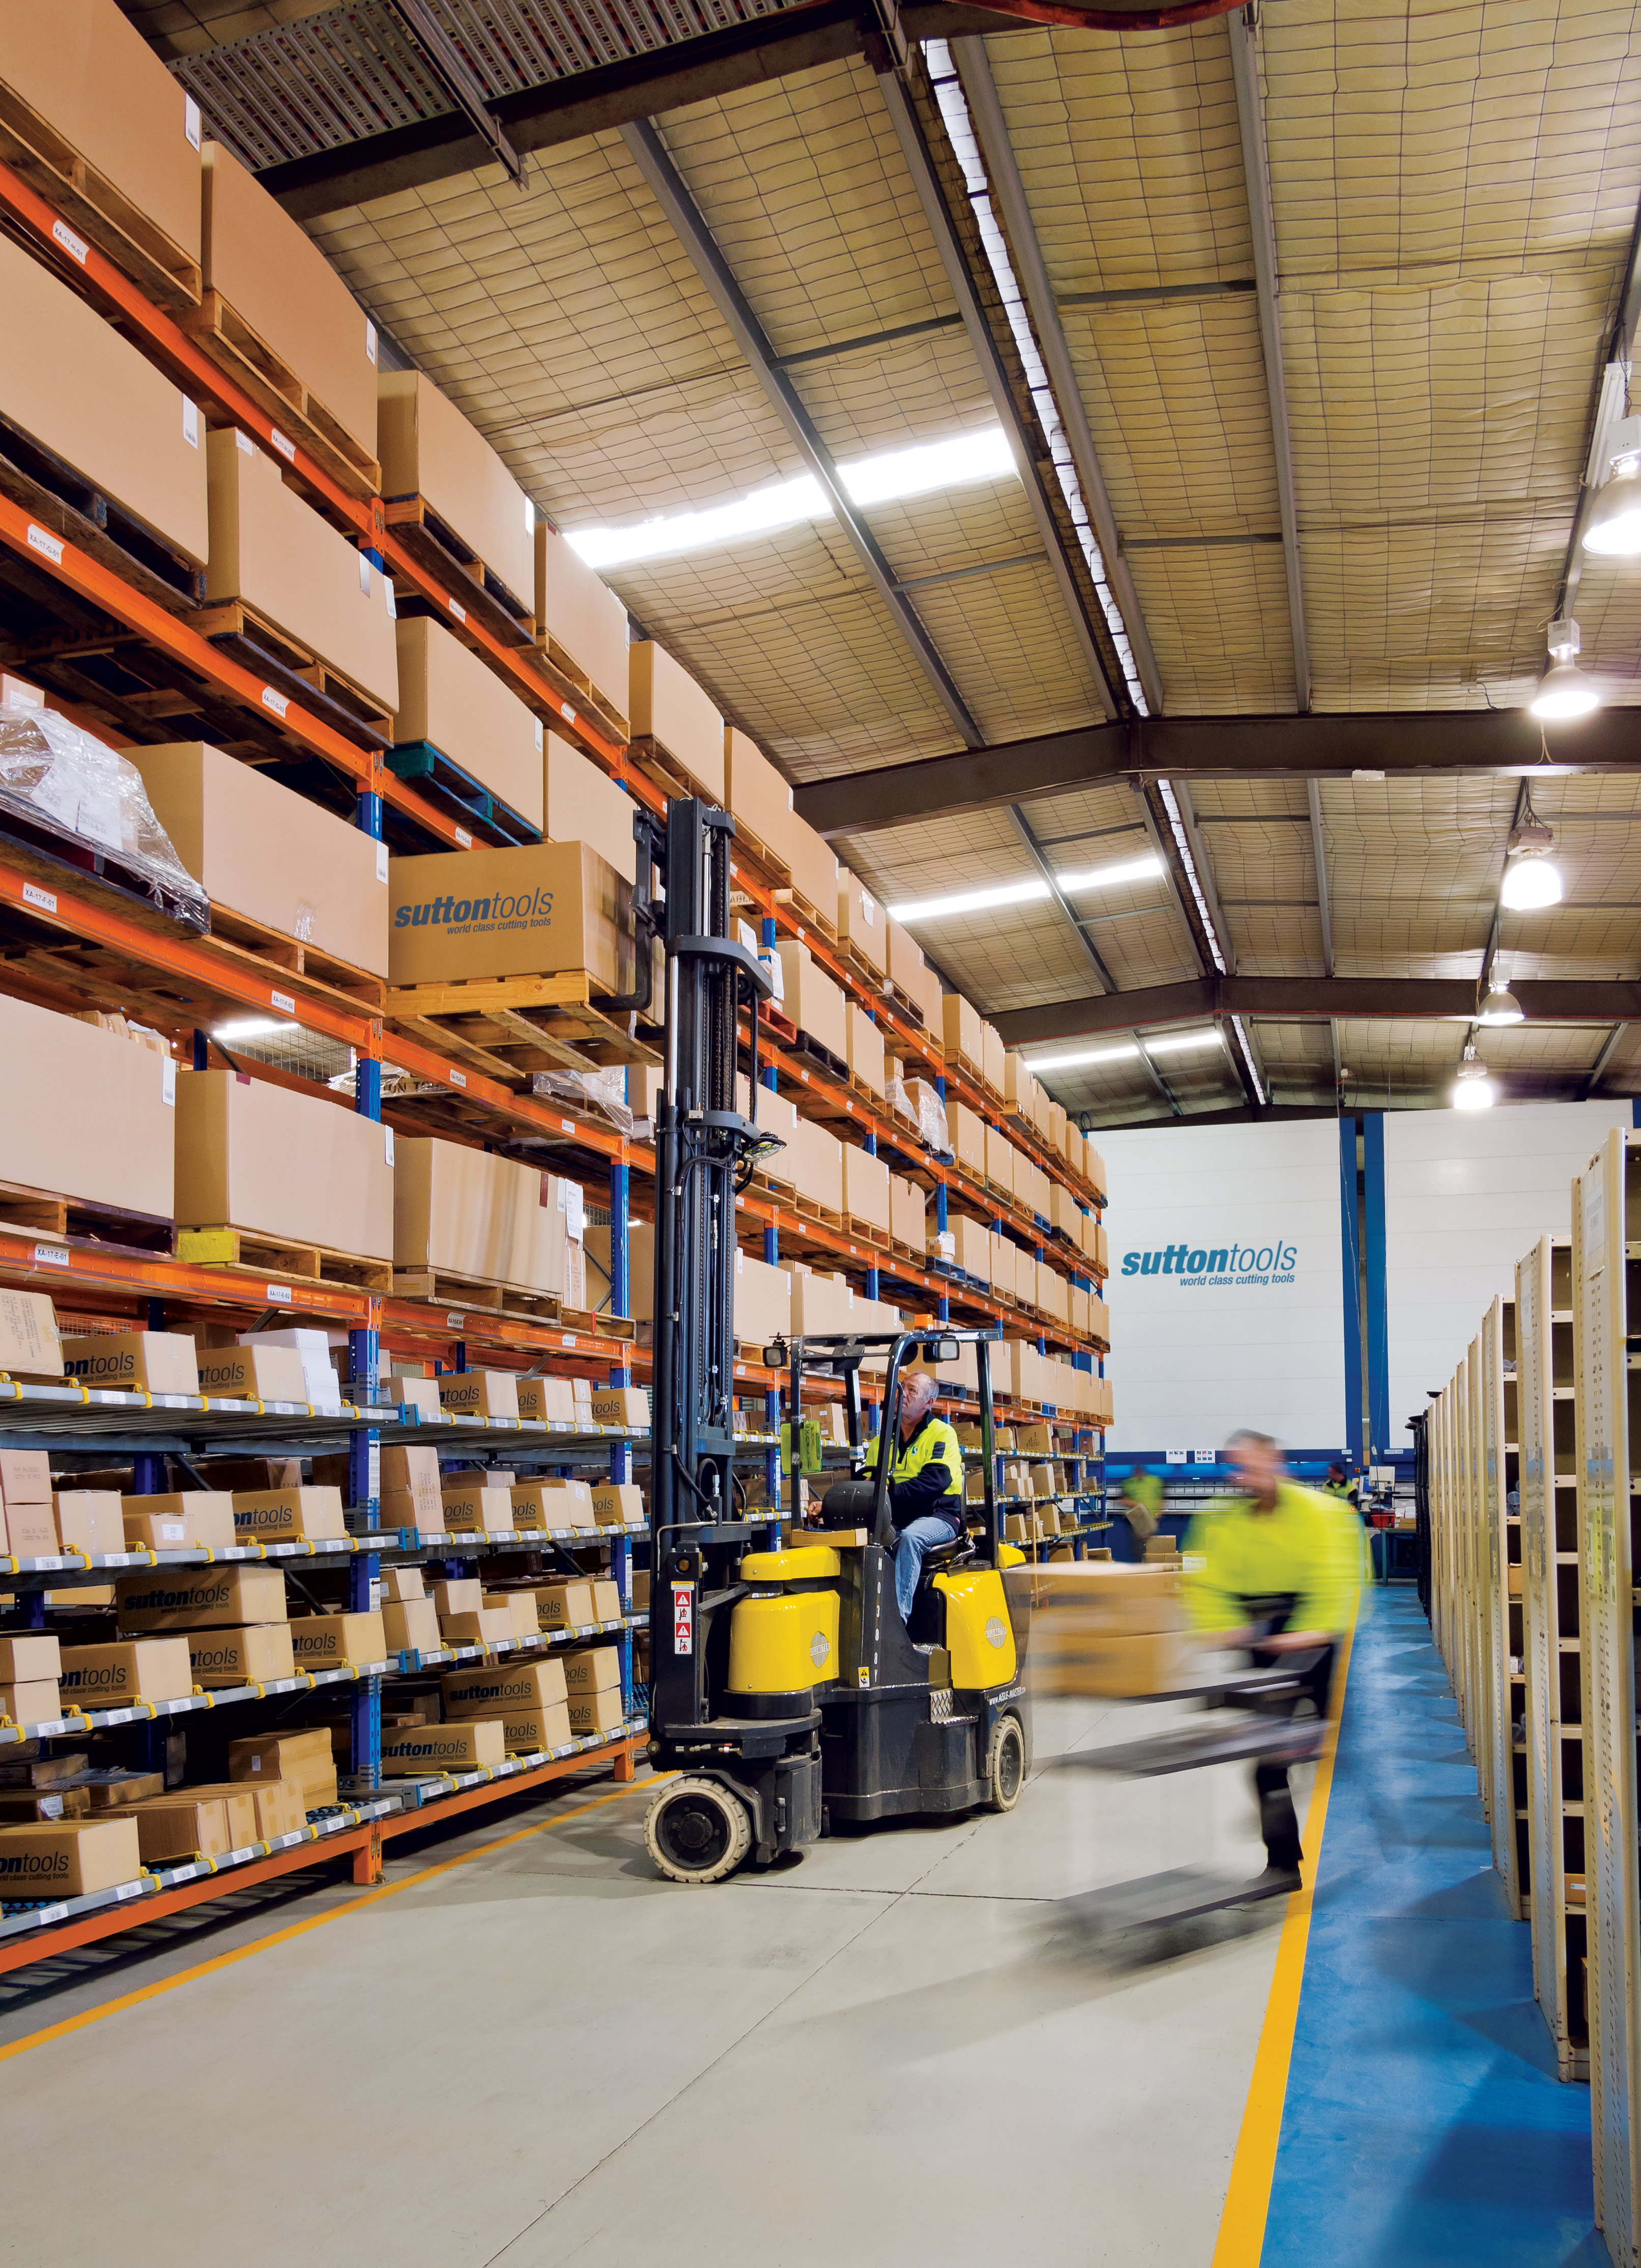 Sutton Tools hones precision delivery with Infor M3 CloudSuite